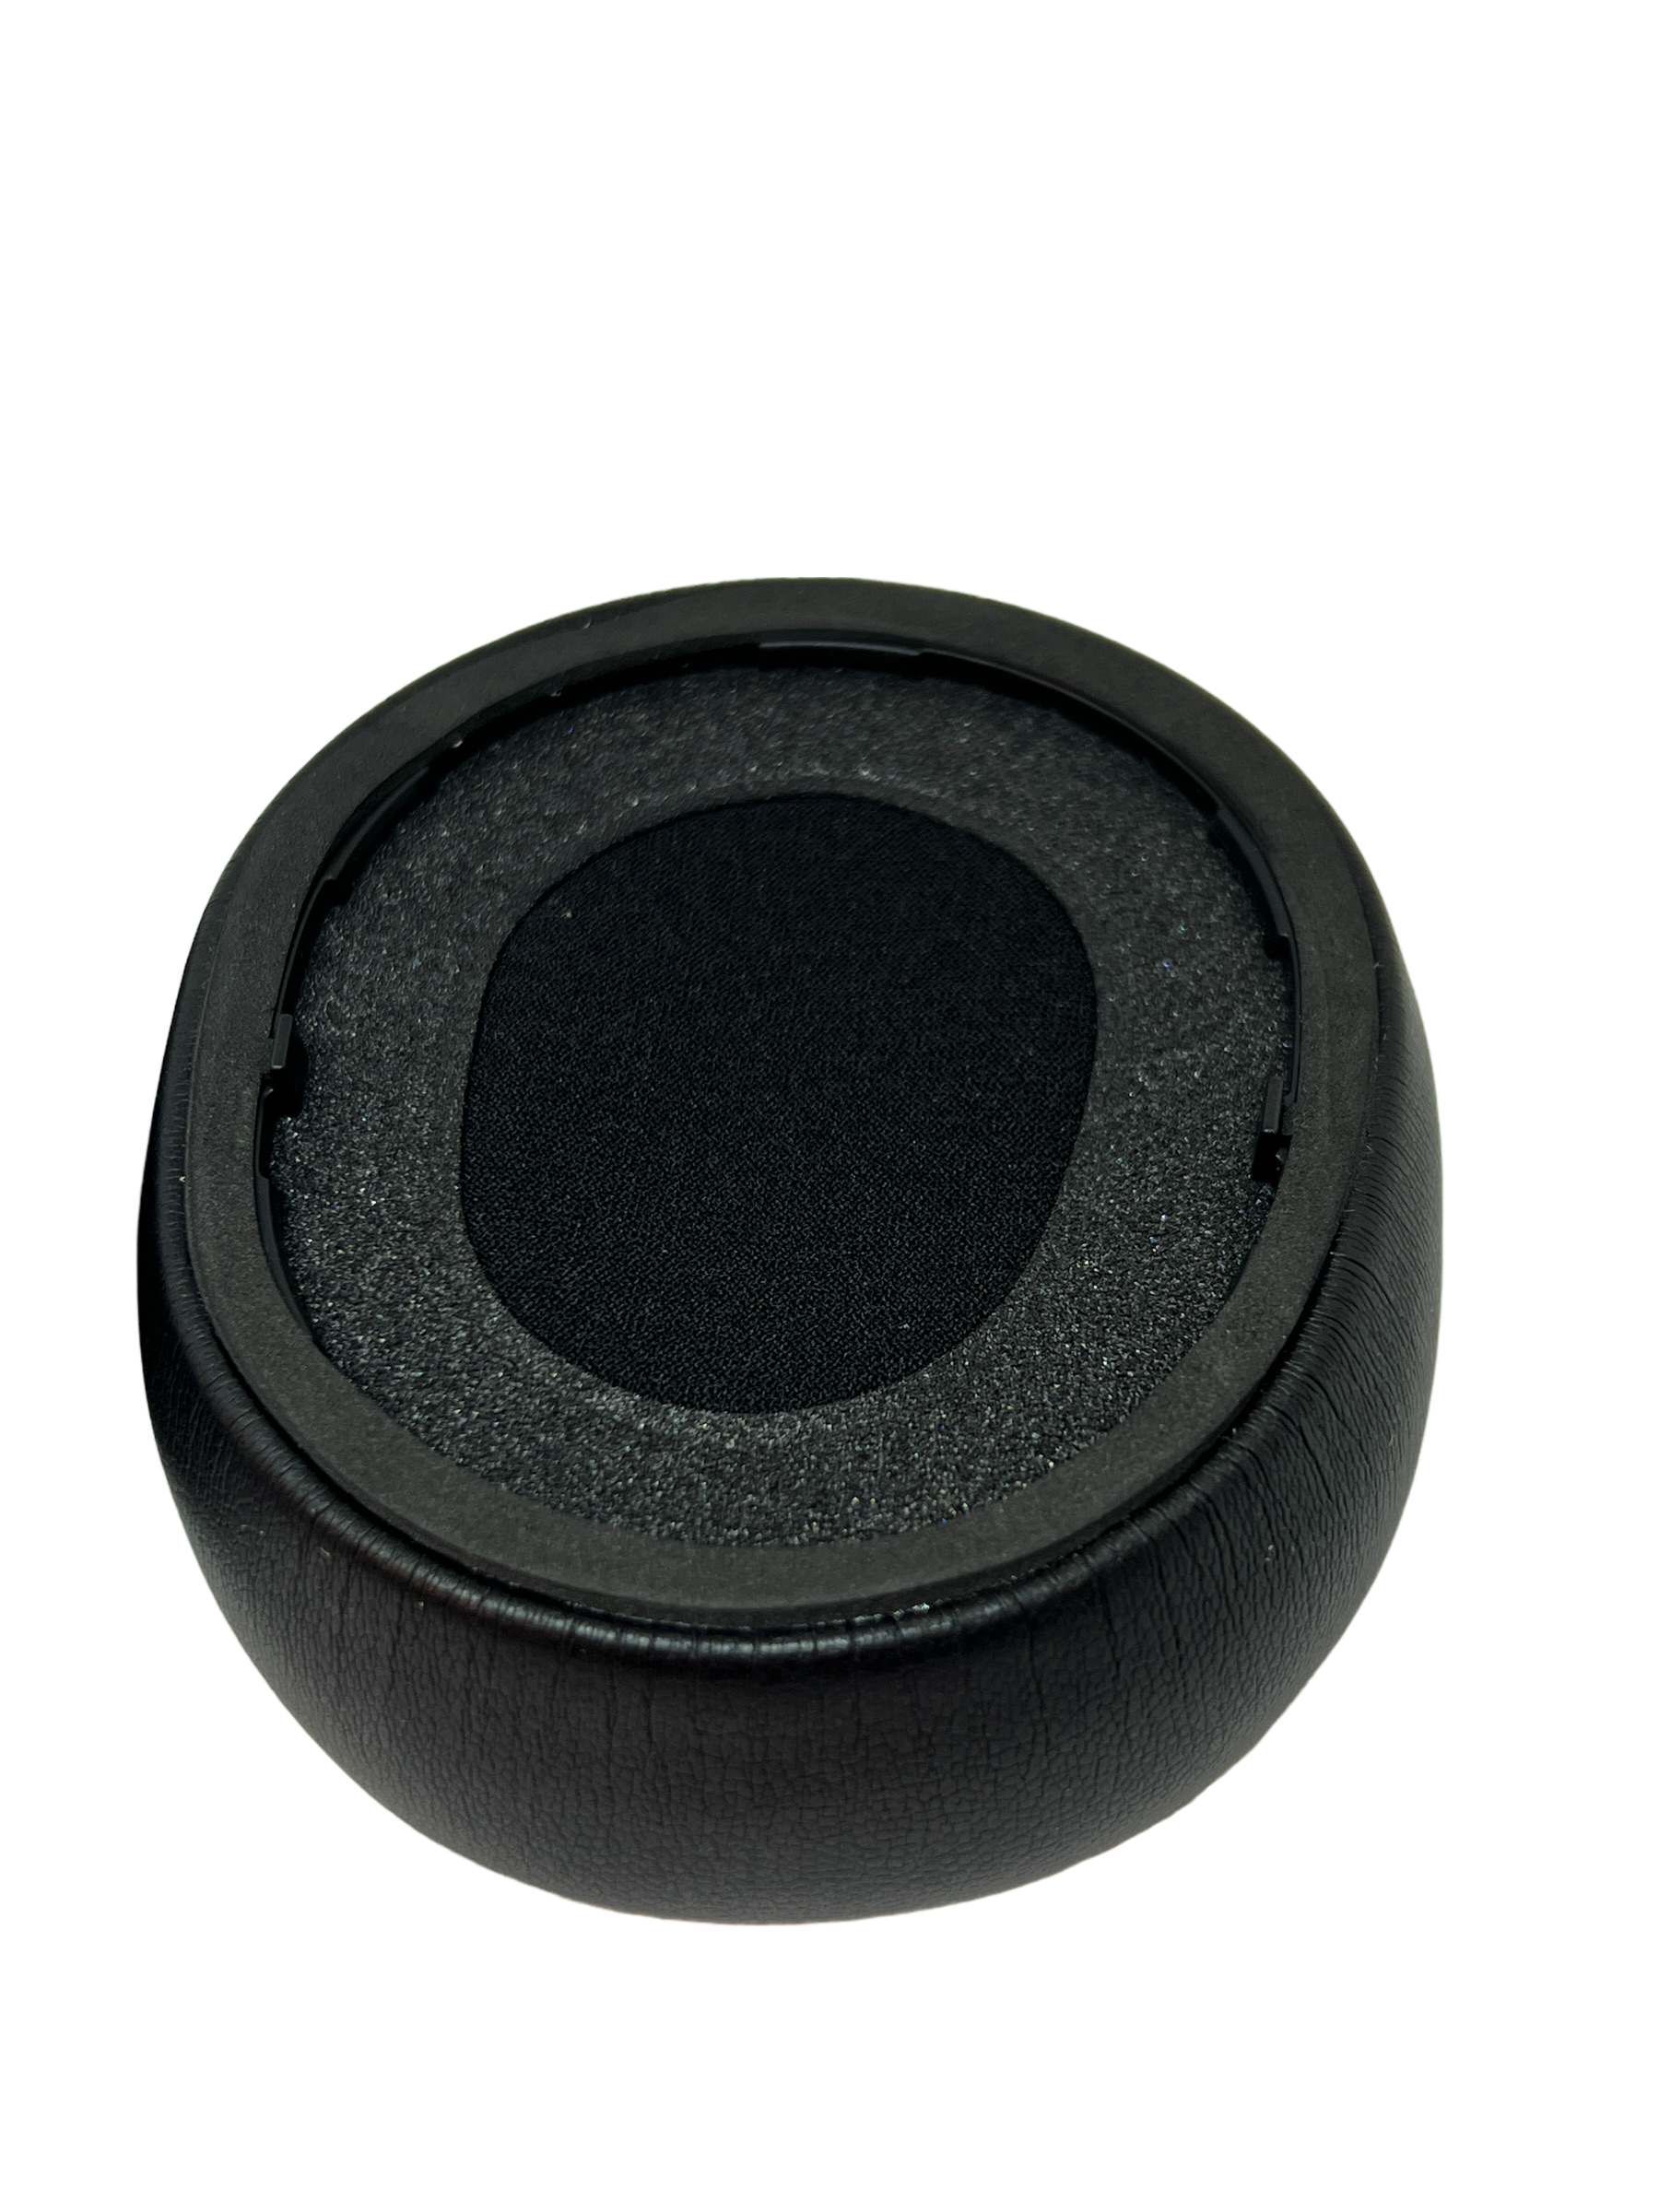 CentralSound  Ear Pad Cushion Replacement Parts for Arctis SteelSeries Nova Pro Wireless Headset - CentralSound